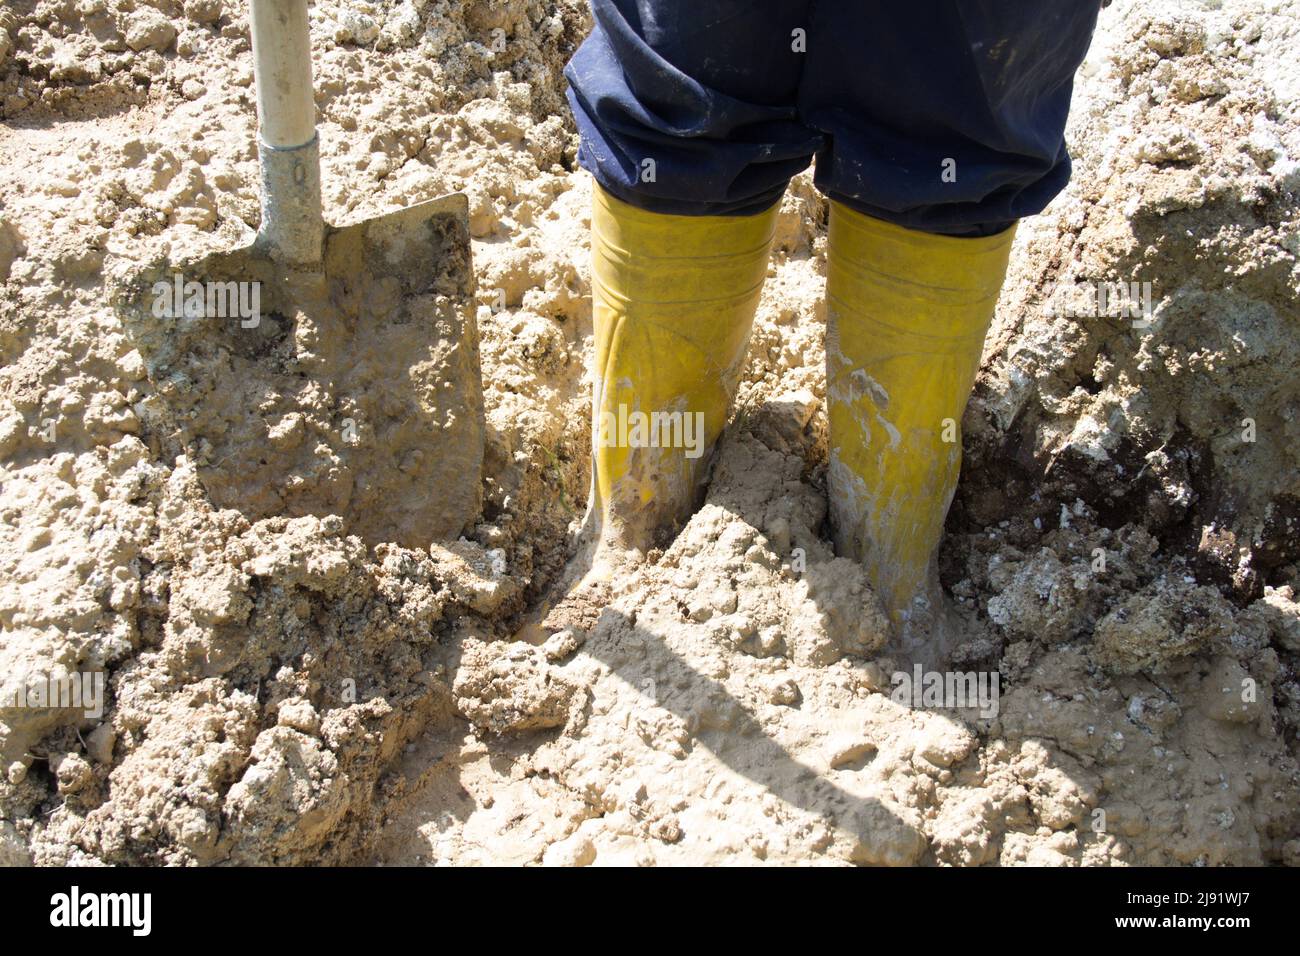 Image of the legs of a man in yellow boots sinking into the mud Stock Photo